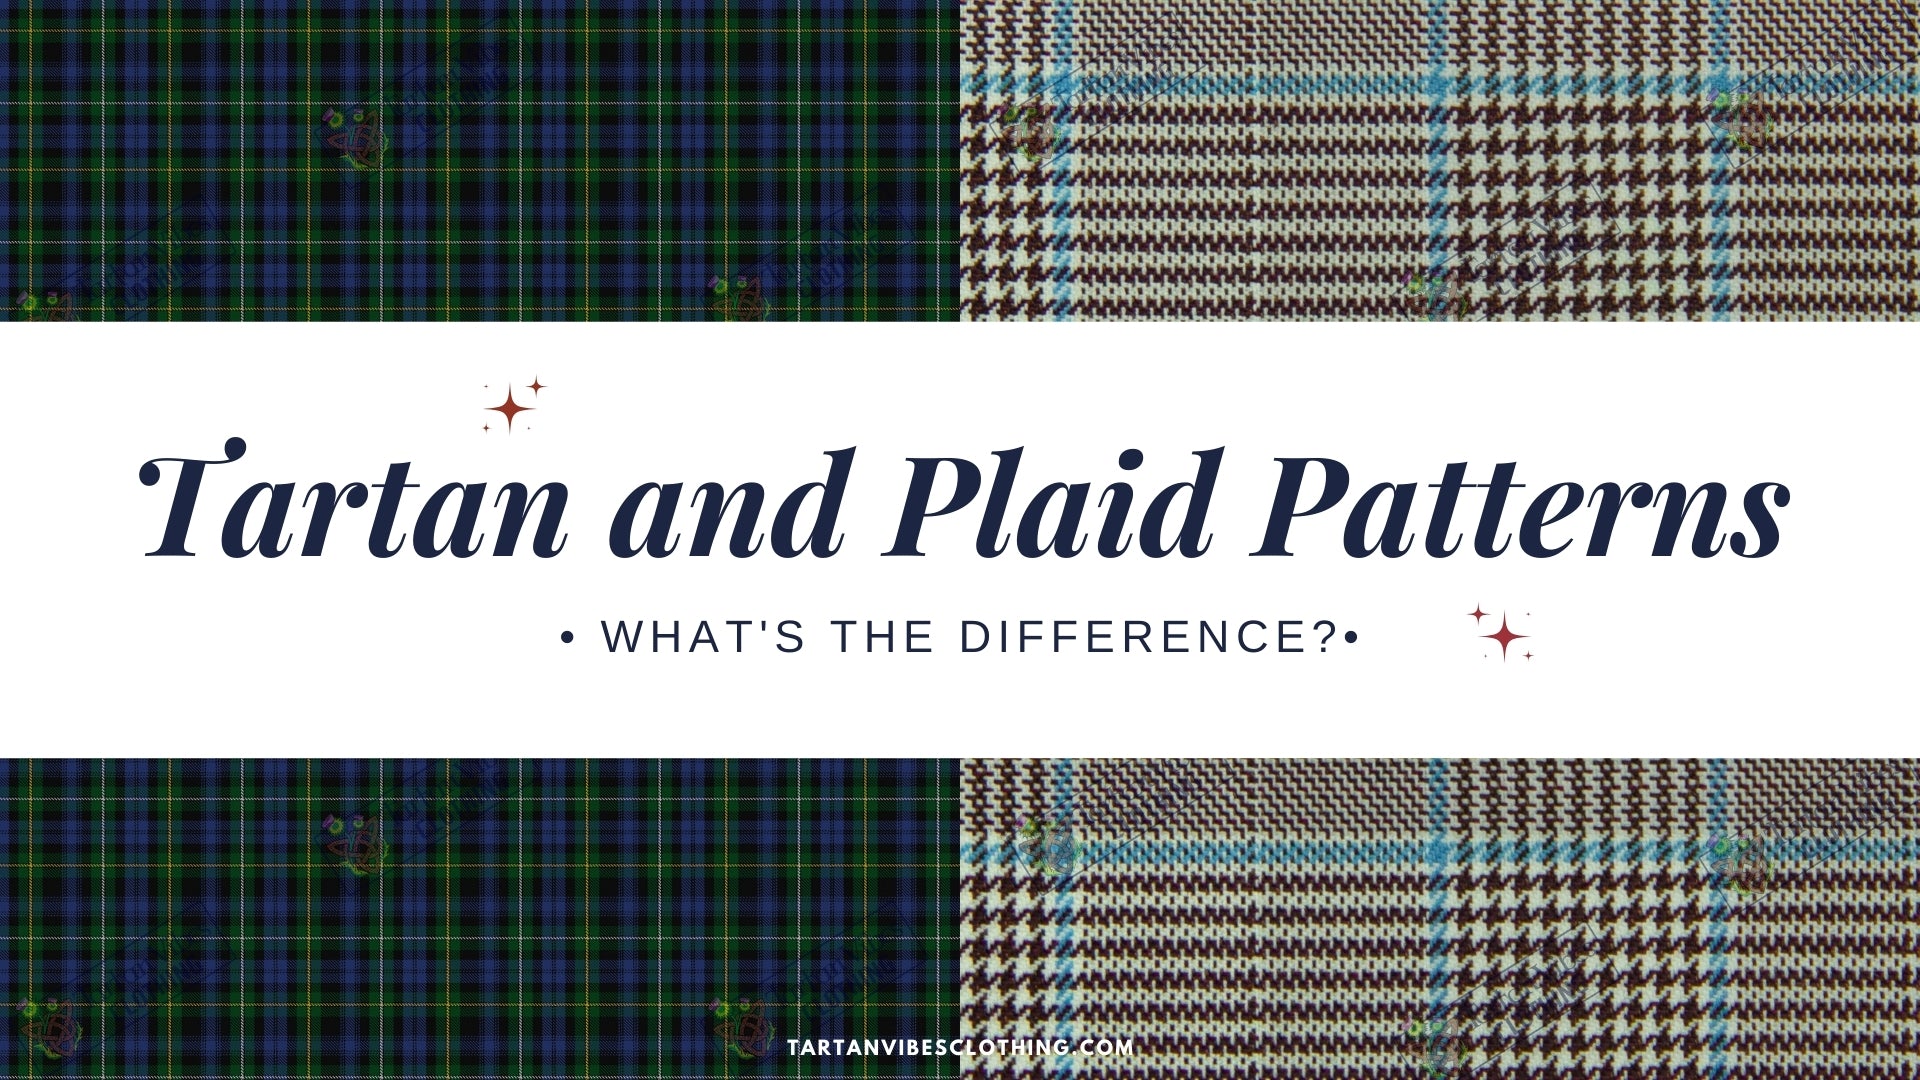 Tartan and Plaid Patterns: What's the Difference?